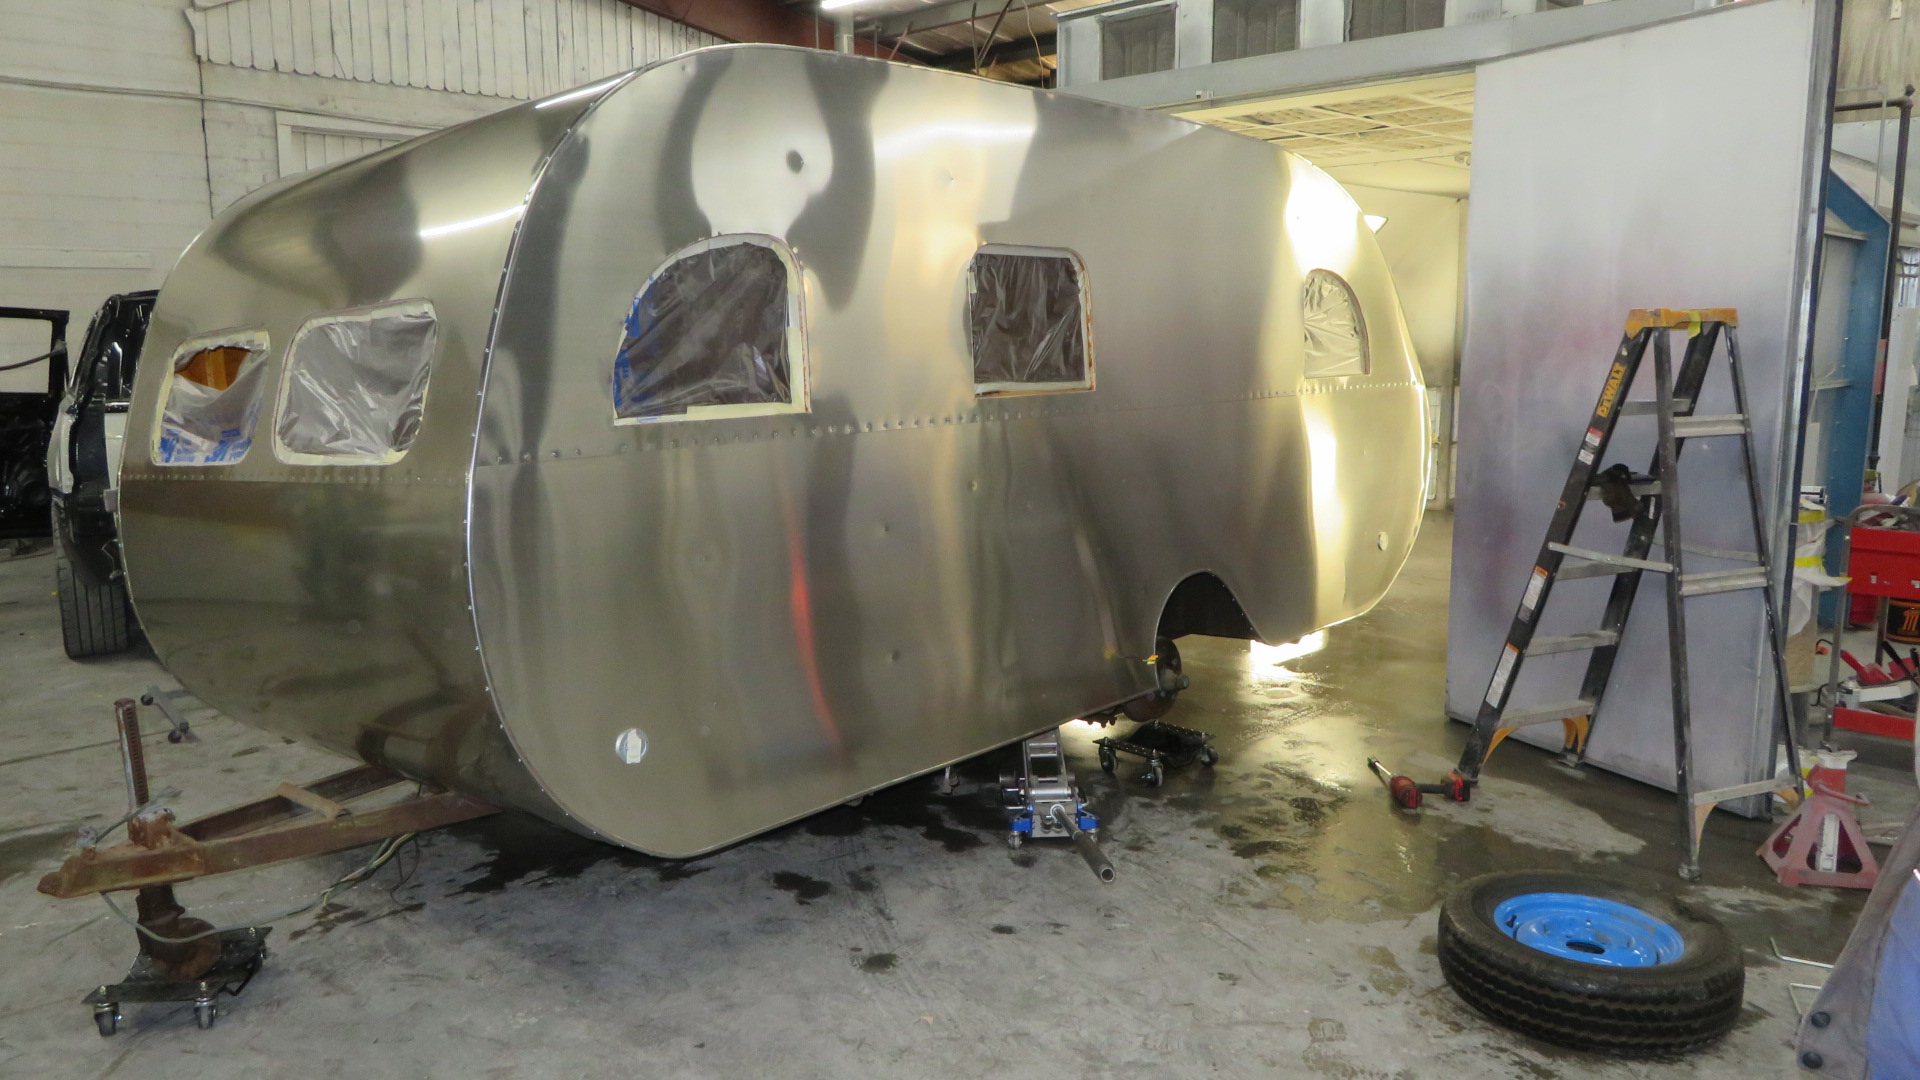 http://www.cannedhamtrailers.com/forum/47mainline/paintbooth.JPG